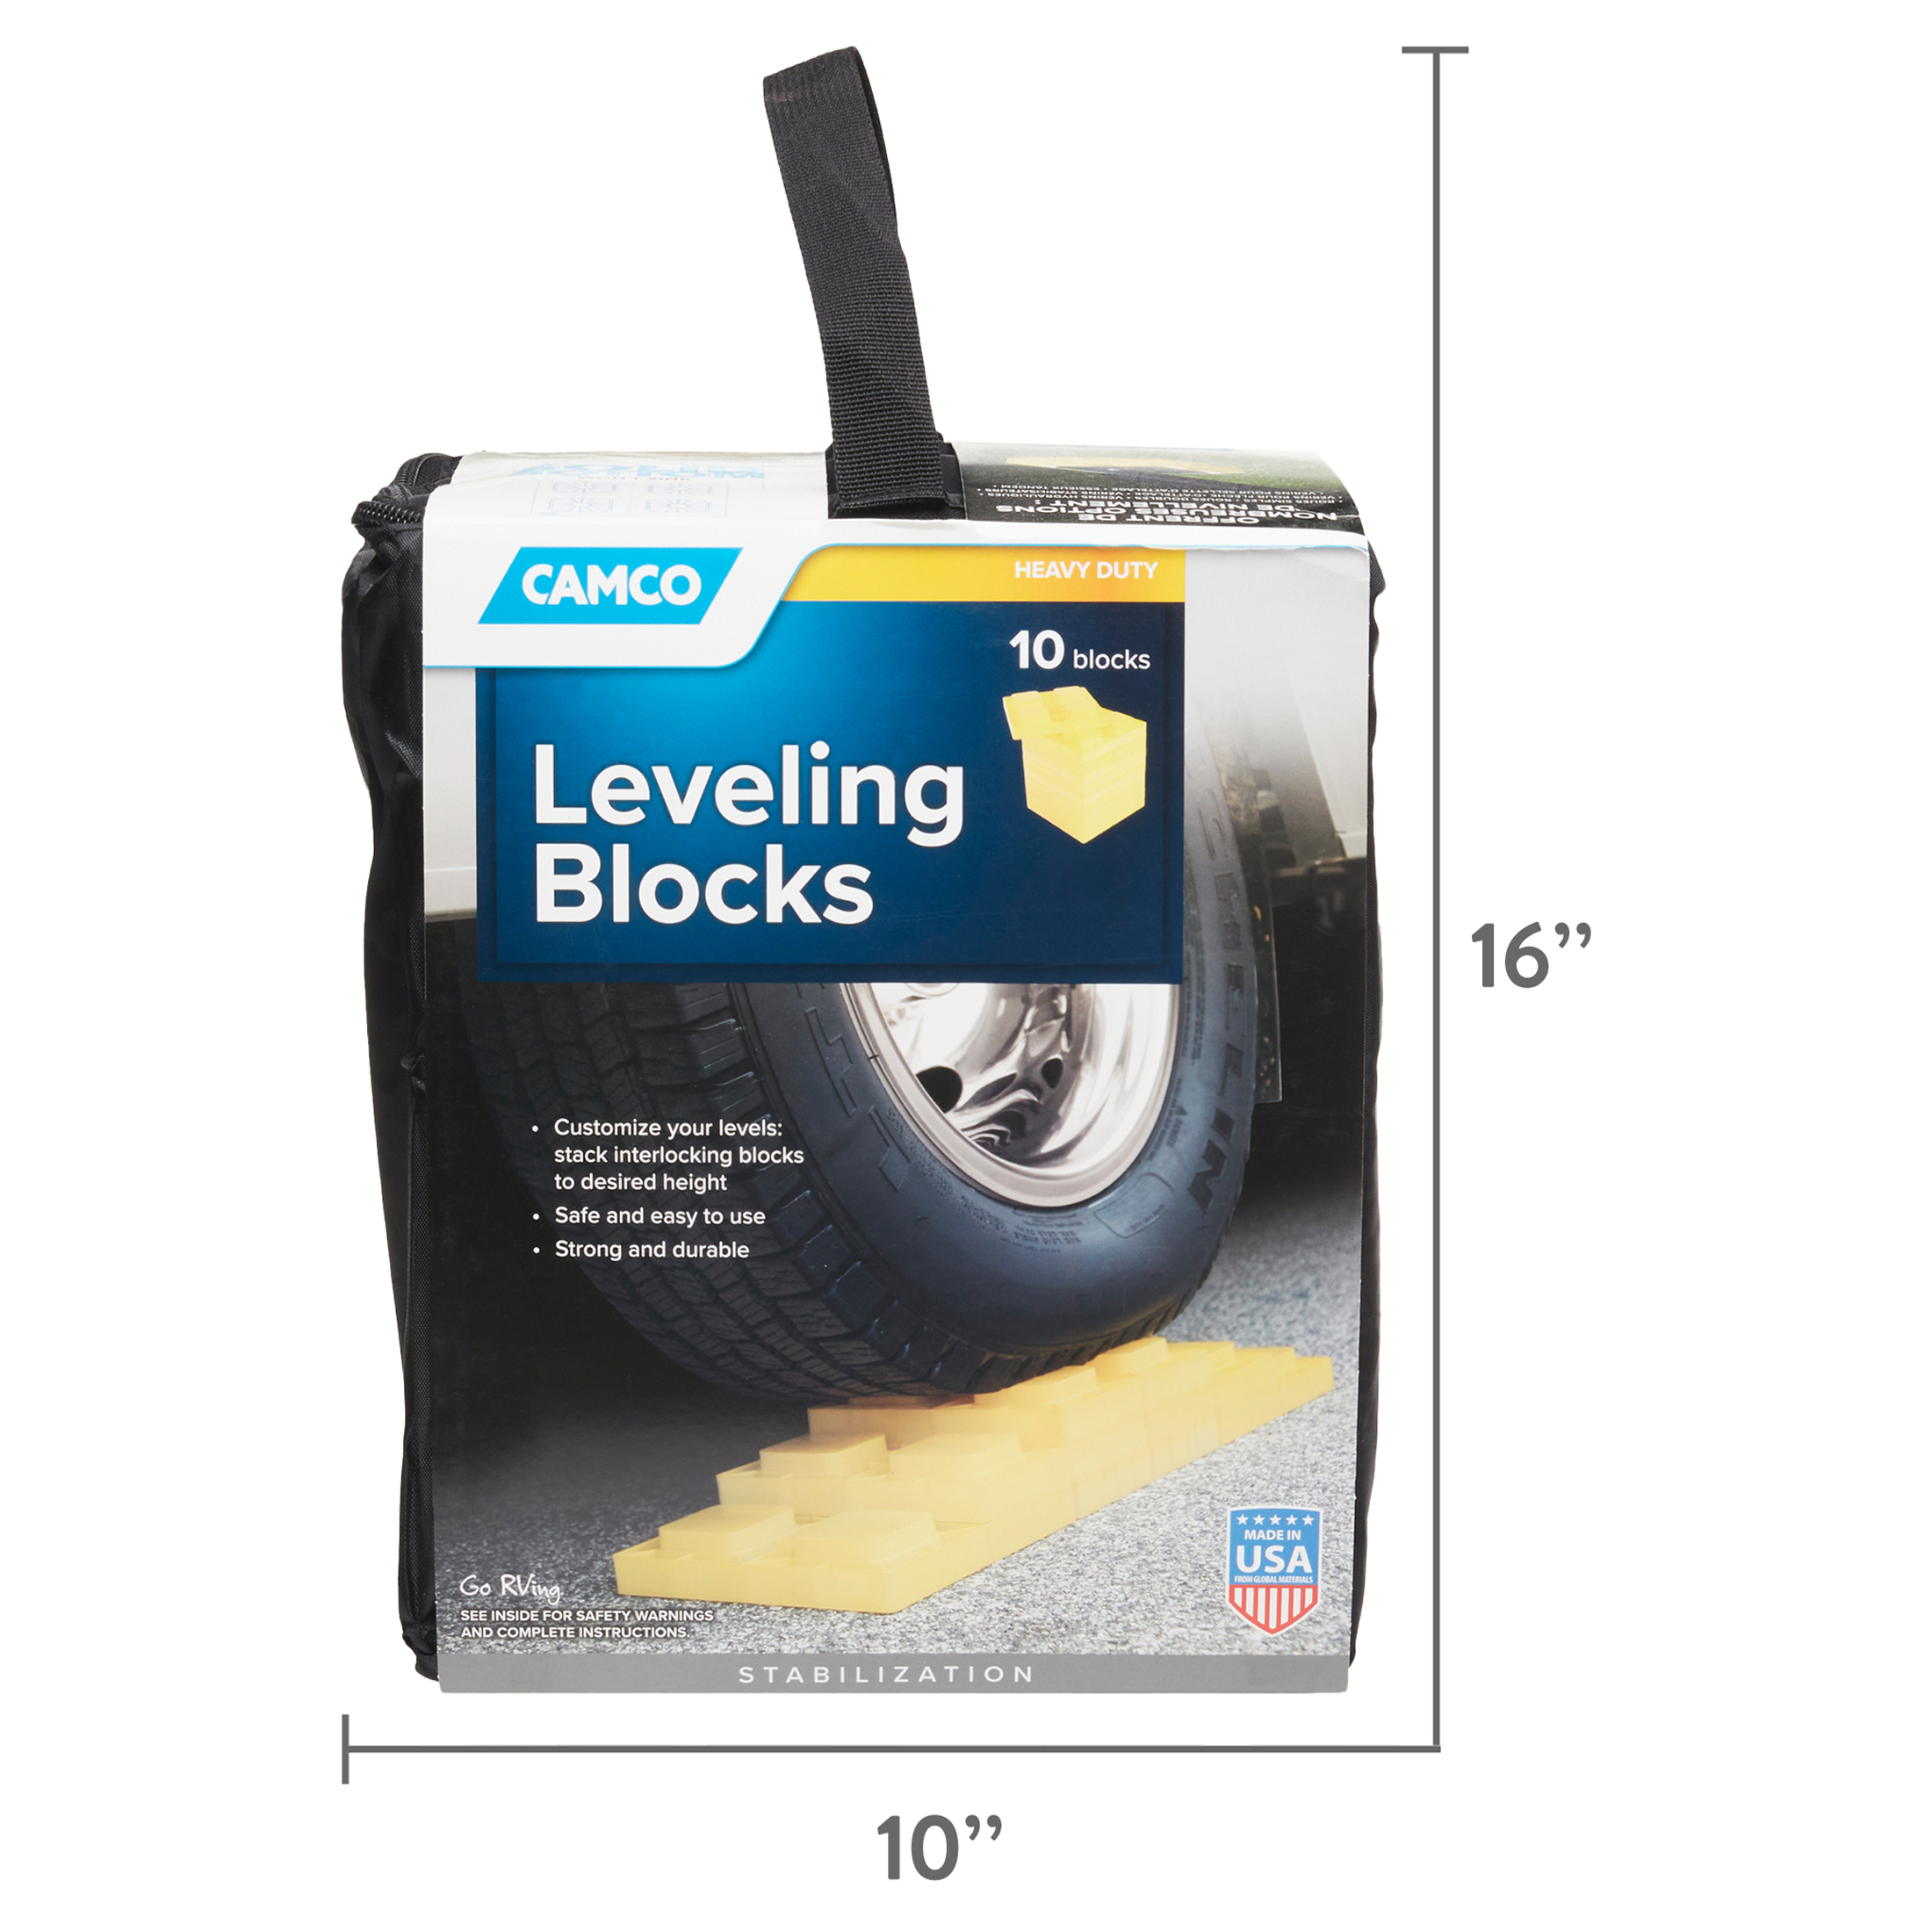 Camco Heavy Duty Leveling Blocks | 10 Pack | Yellow Resin Plastic (44505) - image 5 of 5